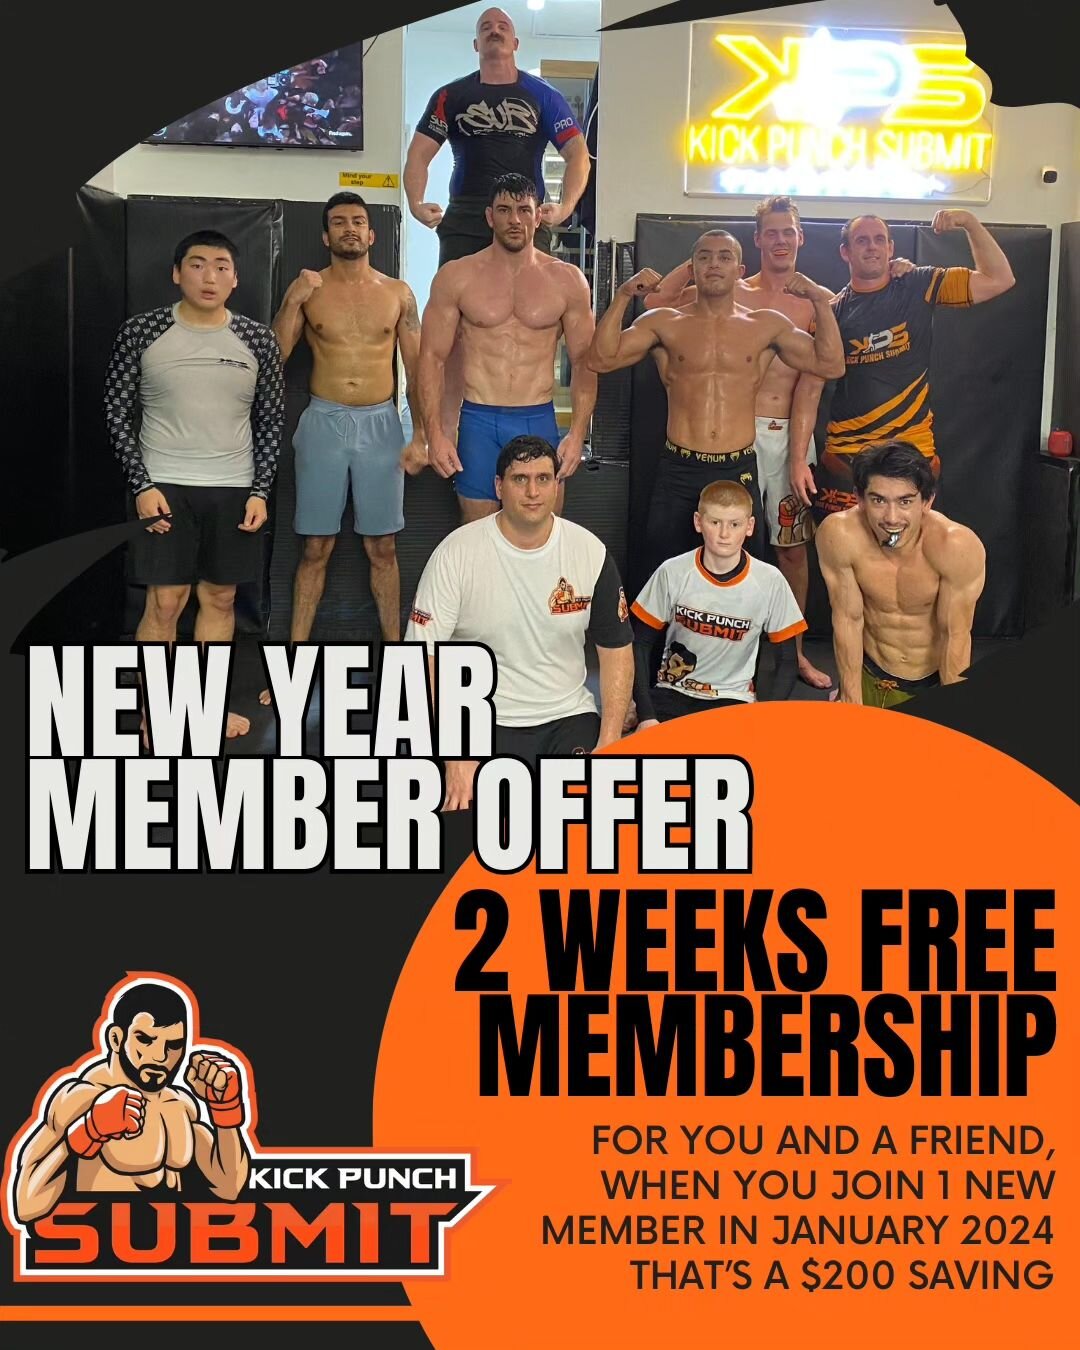 If you're a member of KPS or you're looking at joining this is for you. Get 2 weeks of free training PLUS your 1 week free trial if you're not already a member

That's 3 weeks absolutely free for new signups! And 2 weeks for current members!